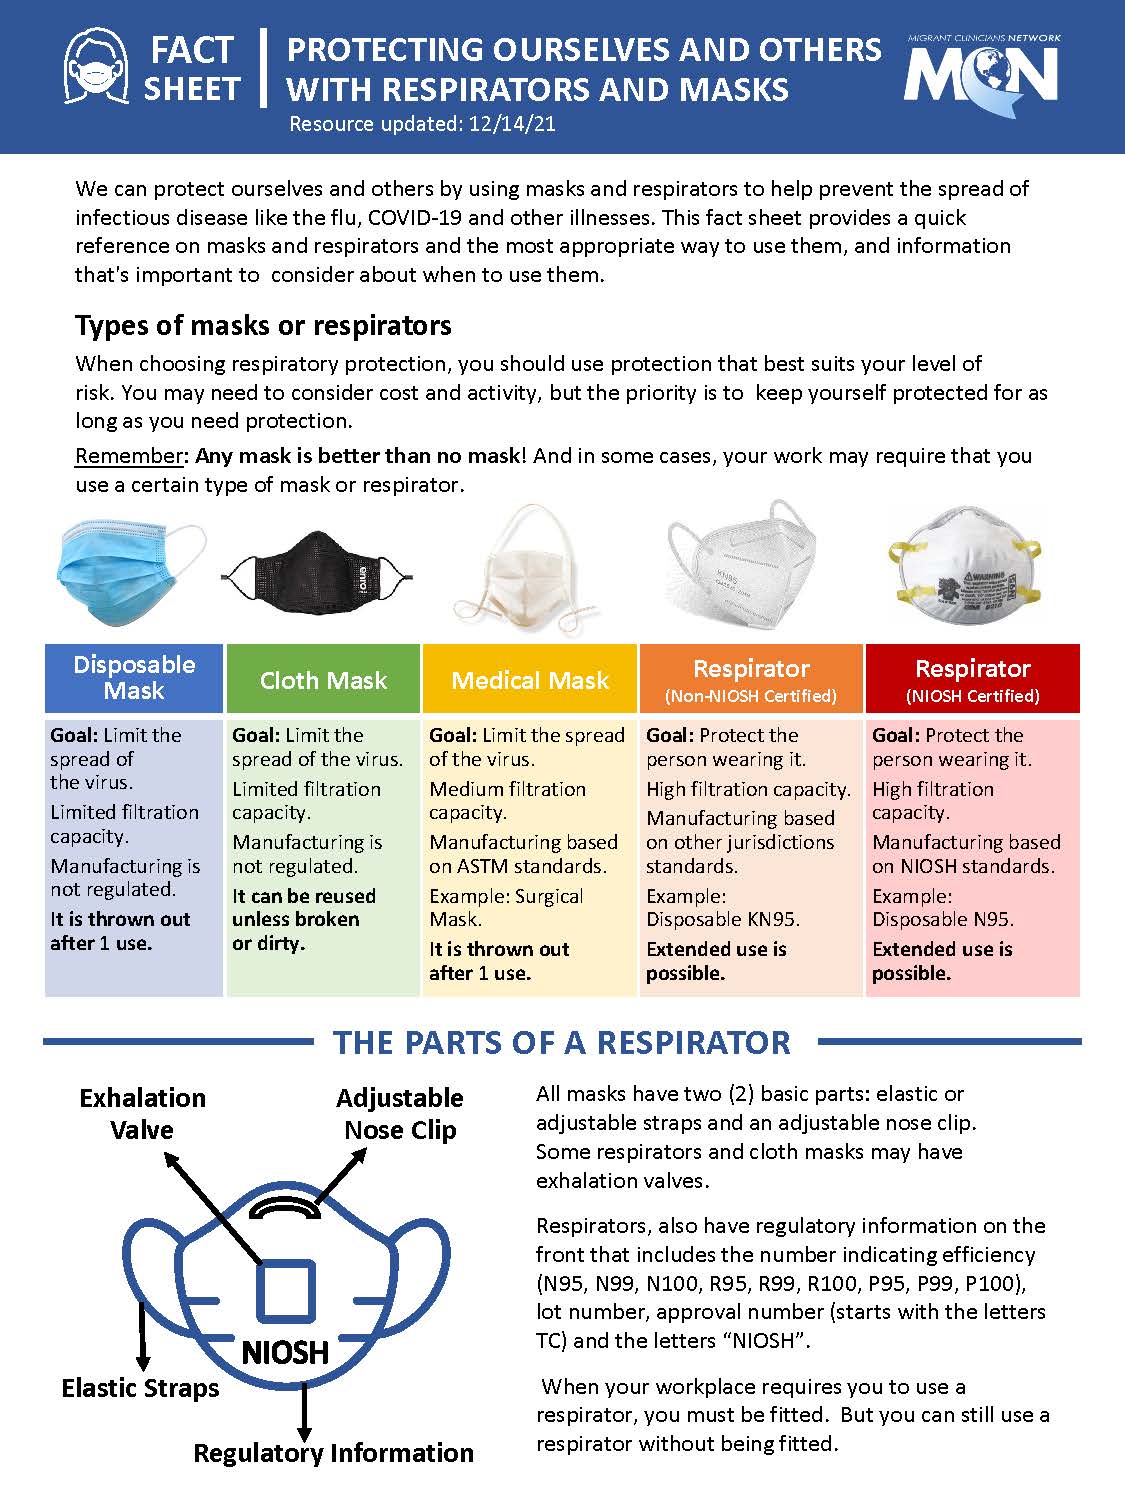 Fact Sheet: Protecting Ourselves and Others With Respirators and Masks